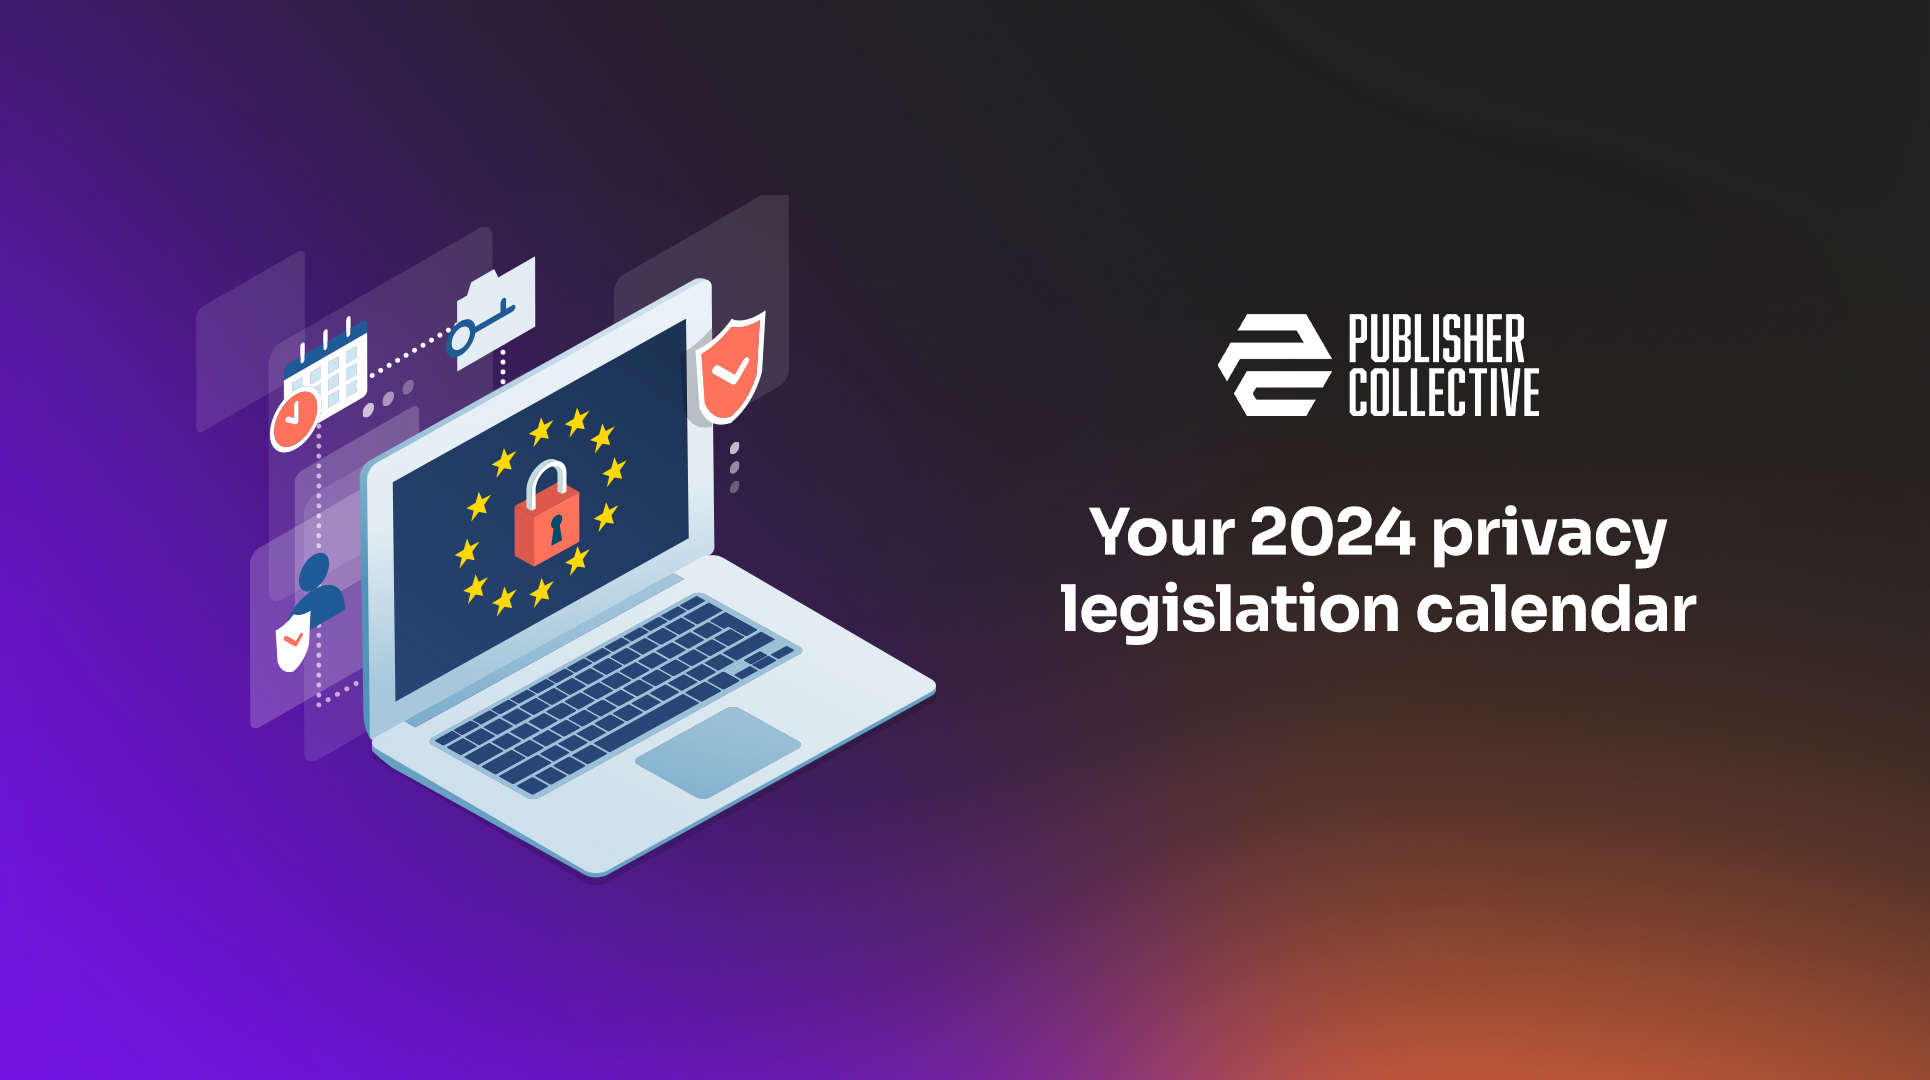 Your 2024 privacy legislation calendar from Publisher Collective